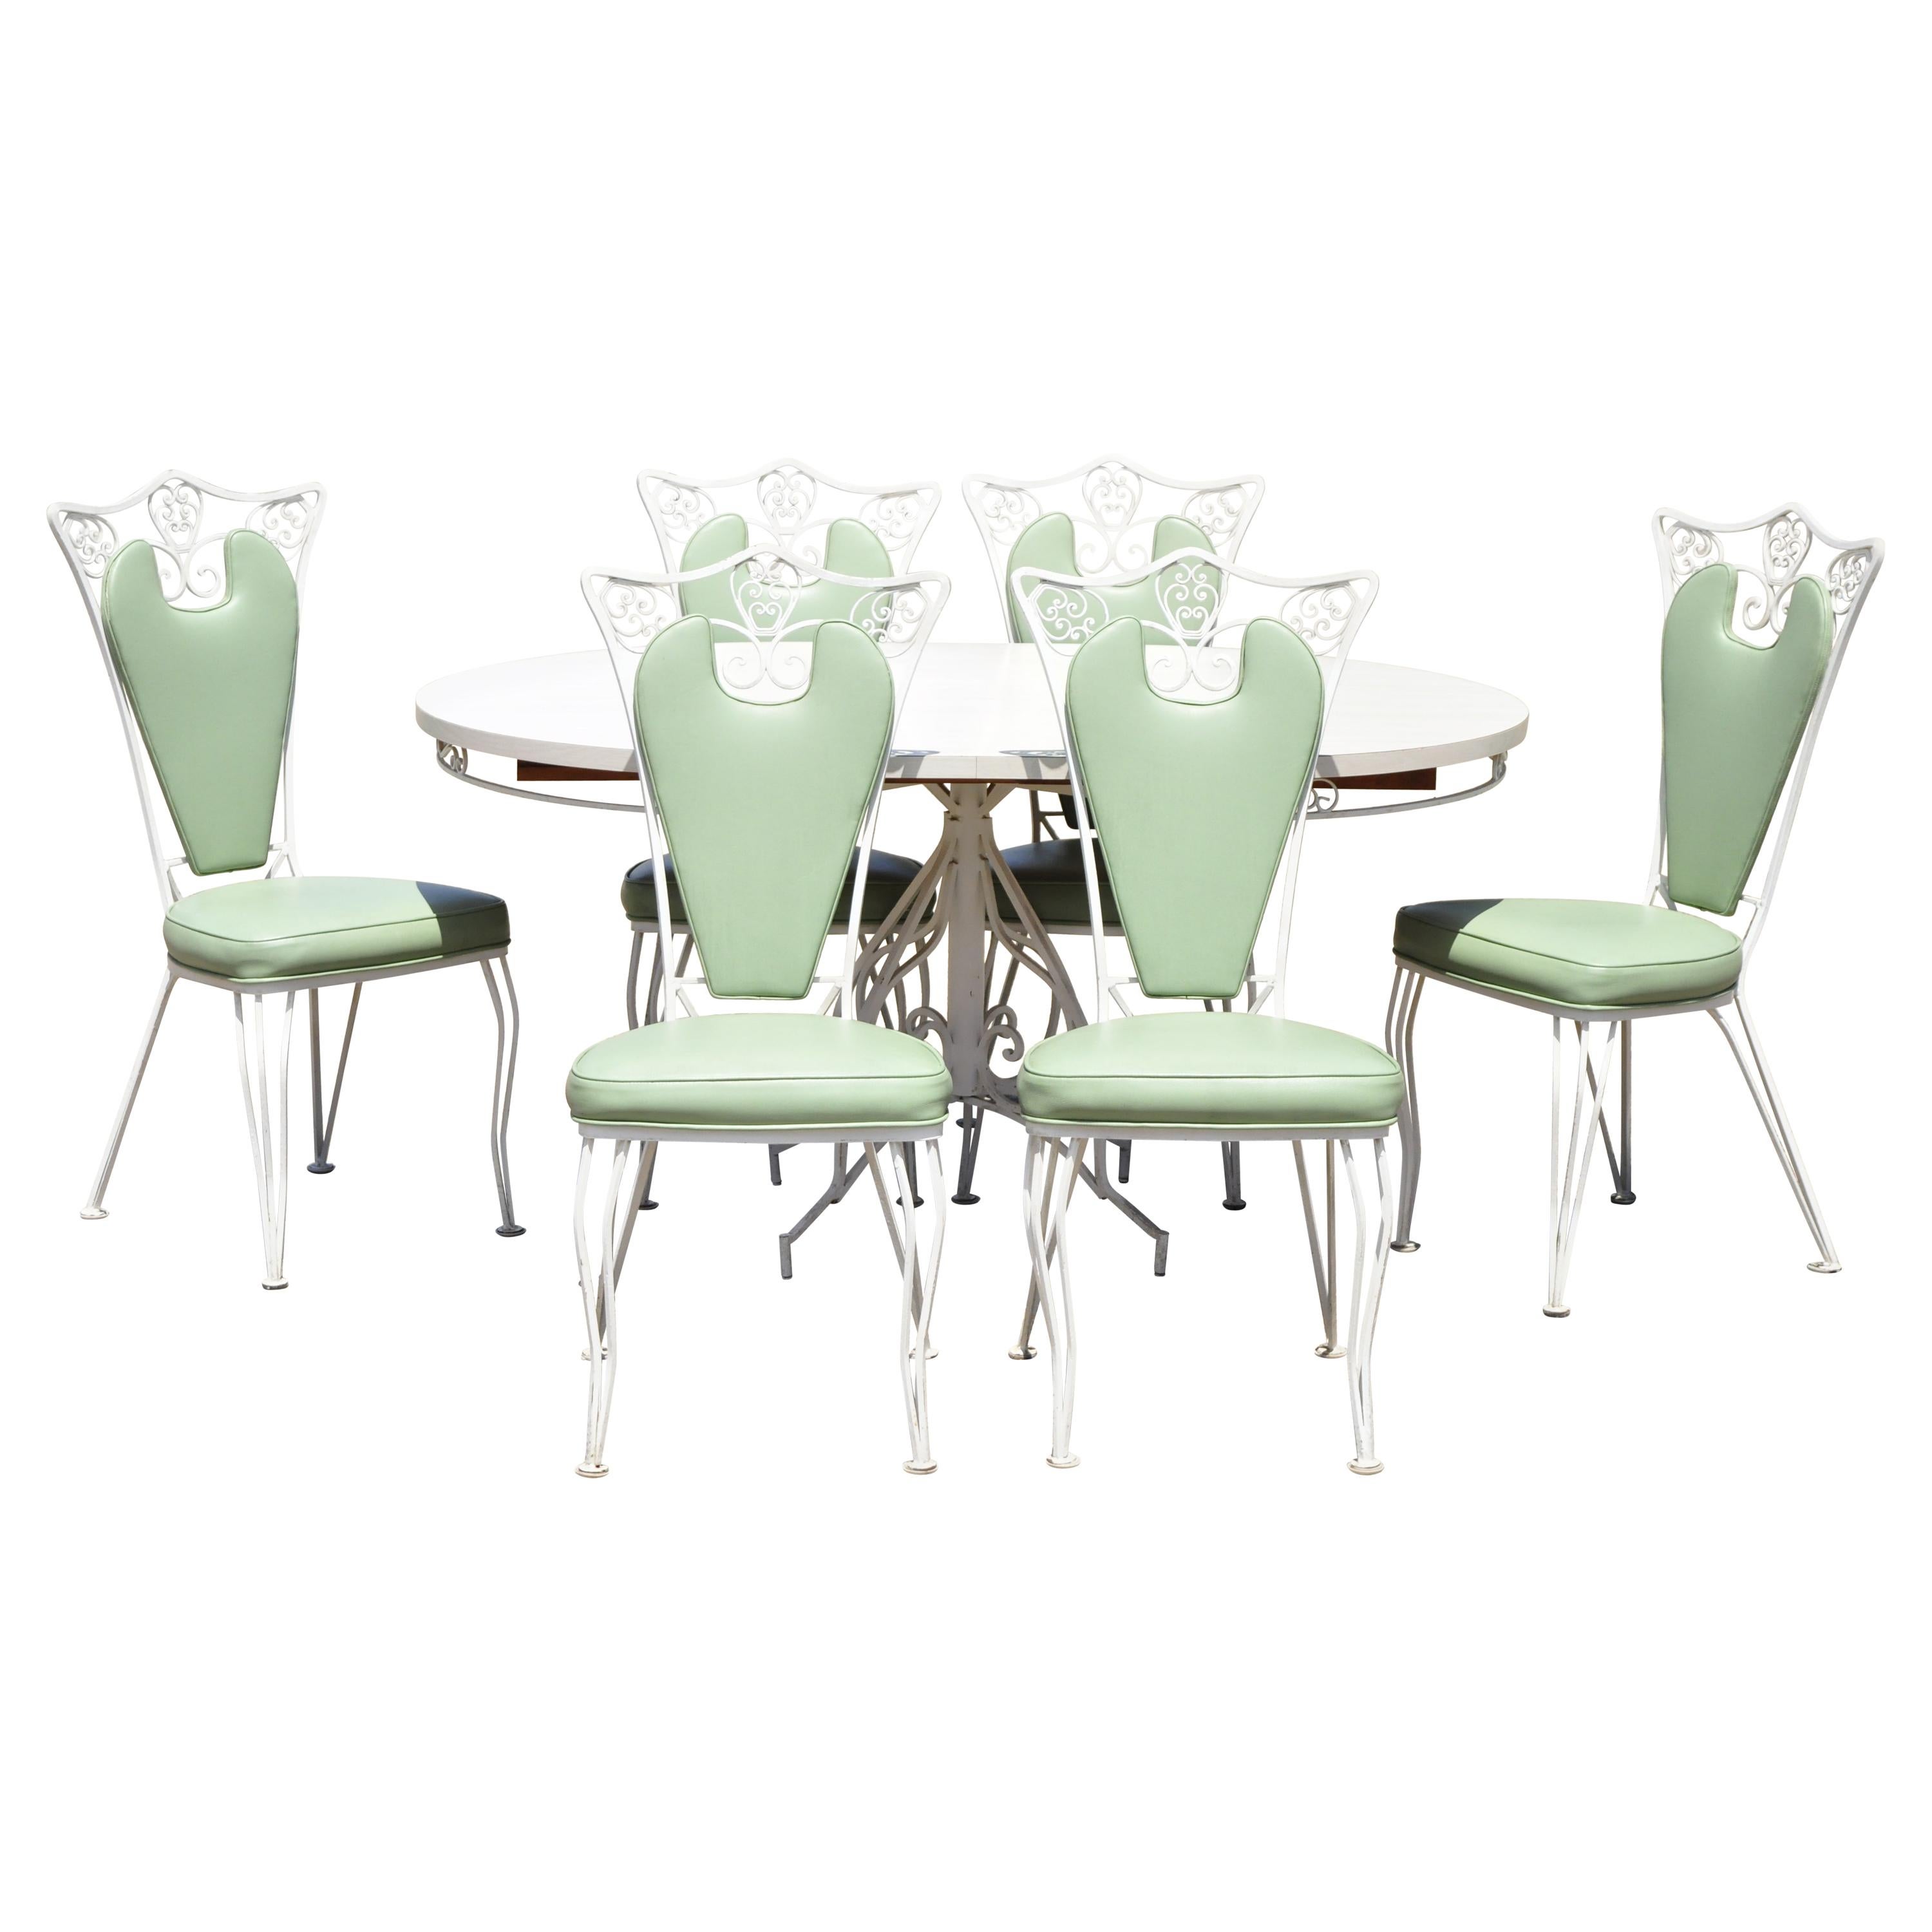 Vintage Regency Wrought Iron Dining Set Oval Table 6 Chairs Mint Green, 7pc Set